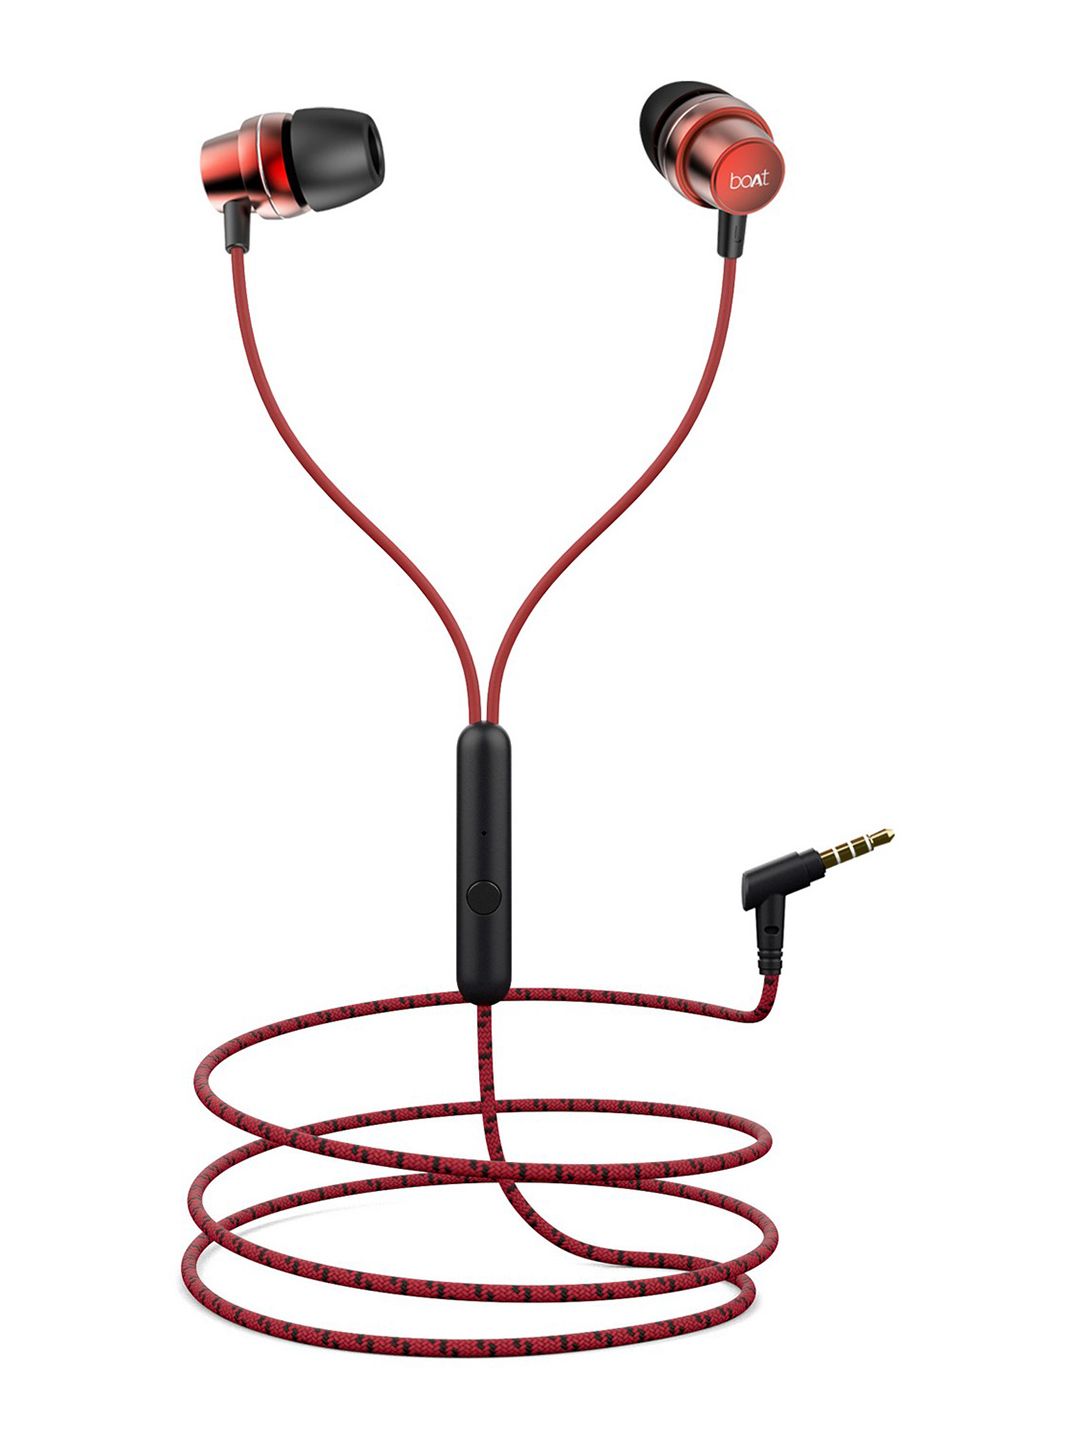 boAt BassHeads 182 Red Braided Wired Earphones with Enhanced Bass & Metallic Finish Price in India